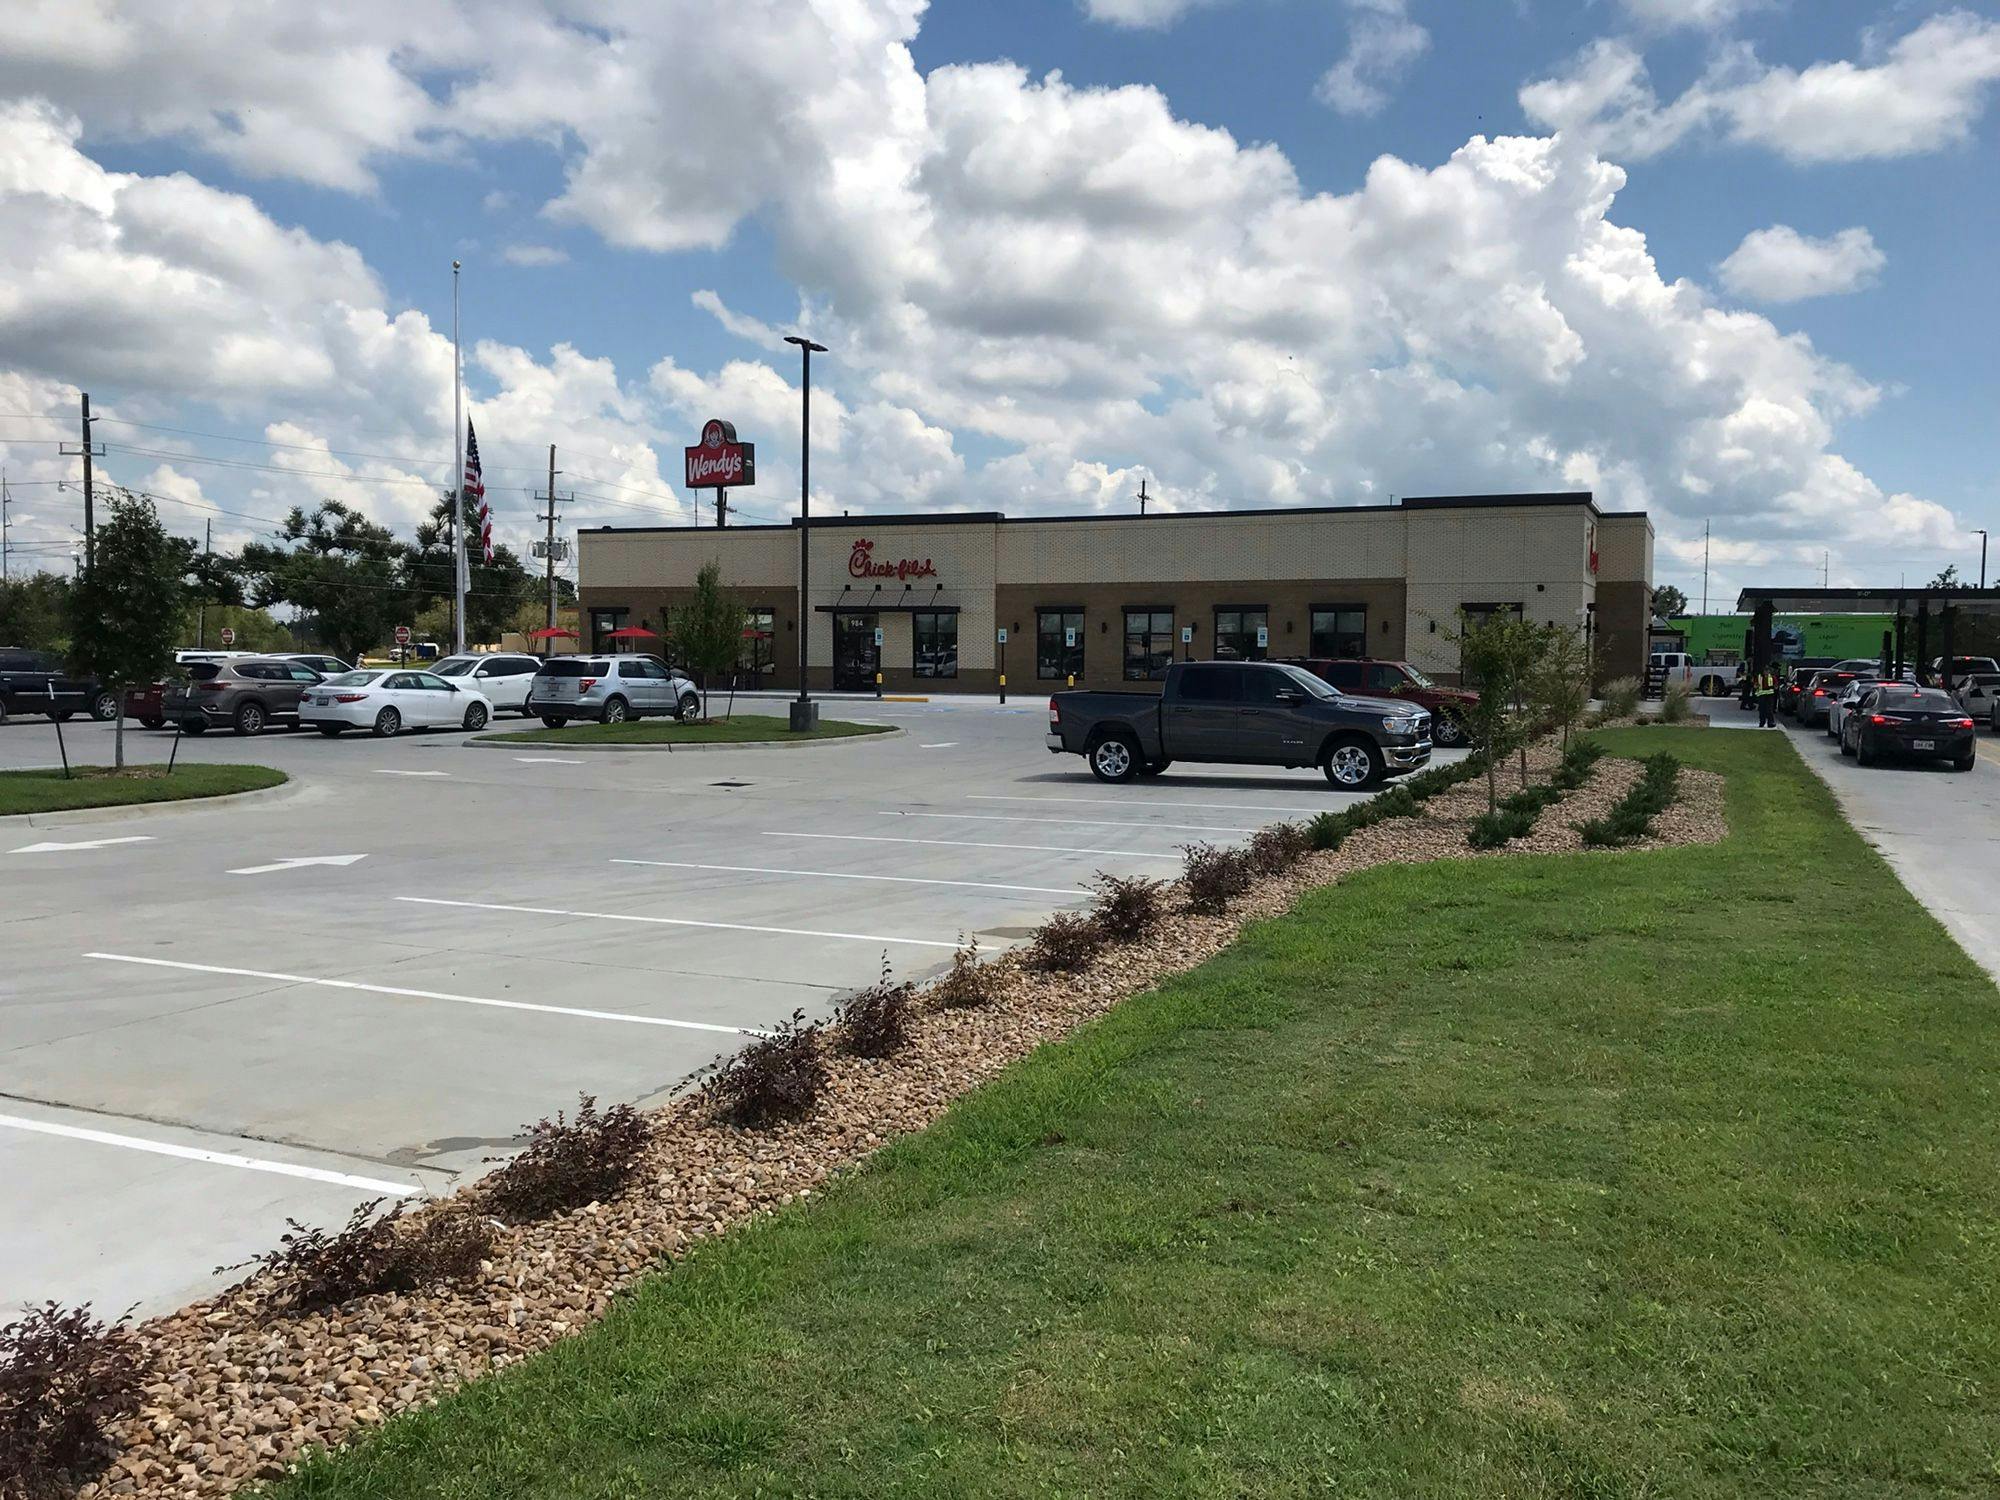 Exterior view of the Chick-Fil-A restaurant in Houma, LA.